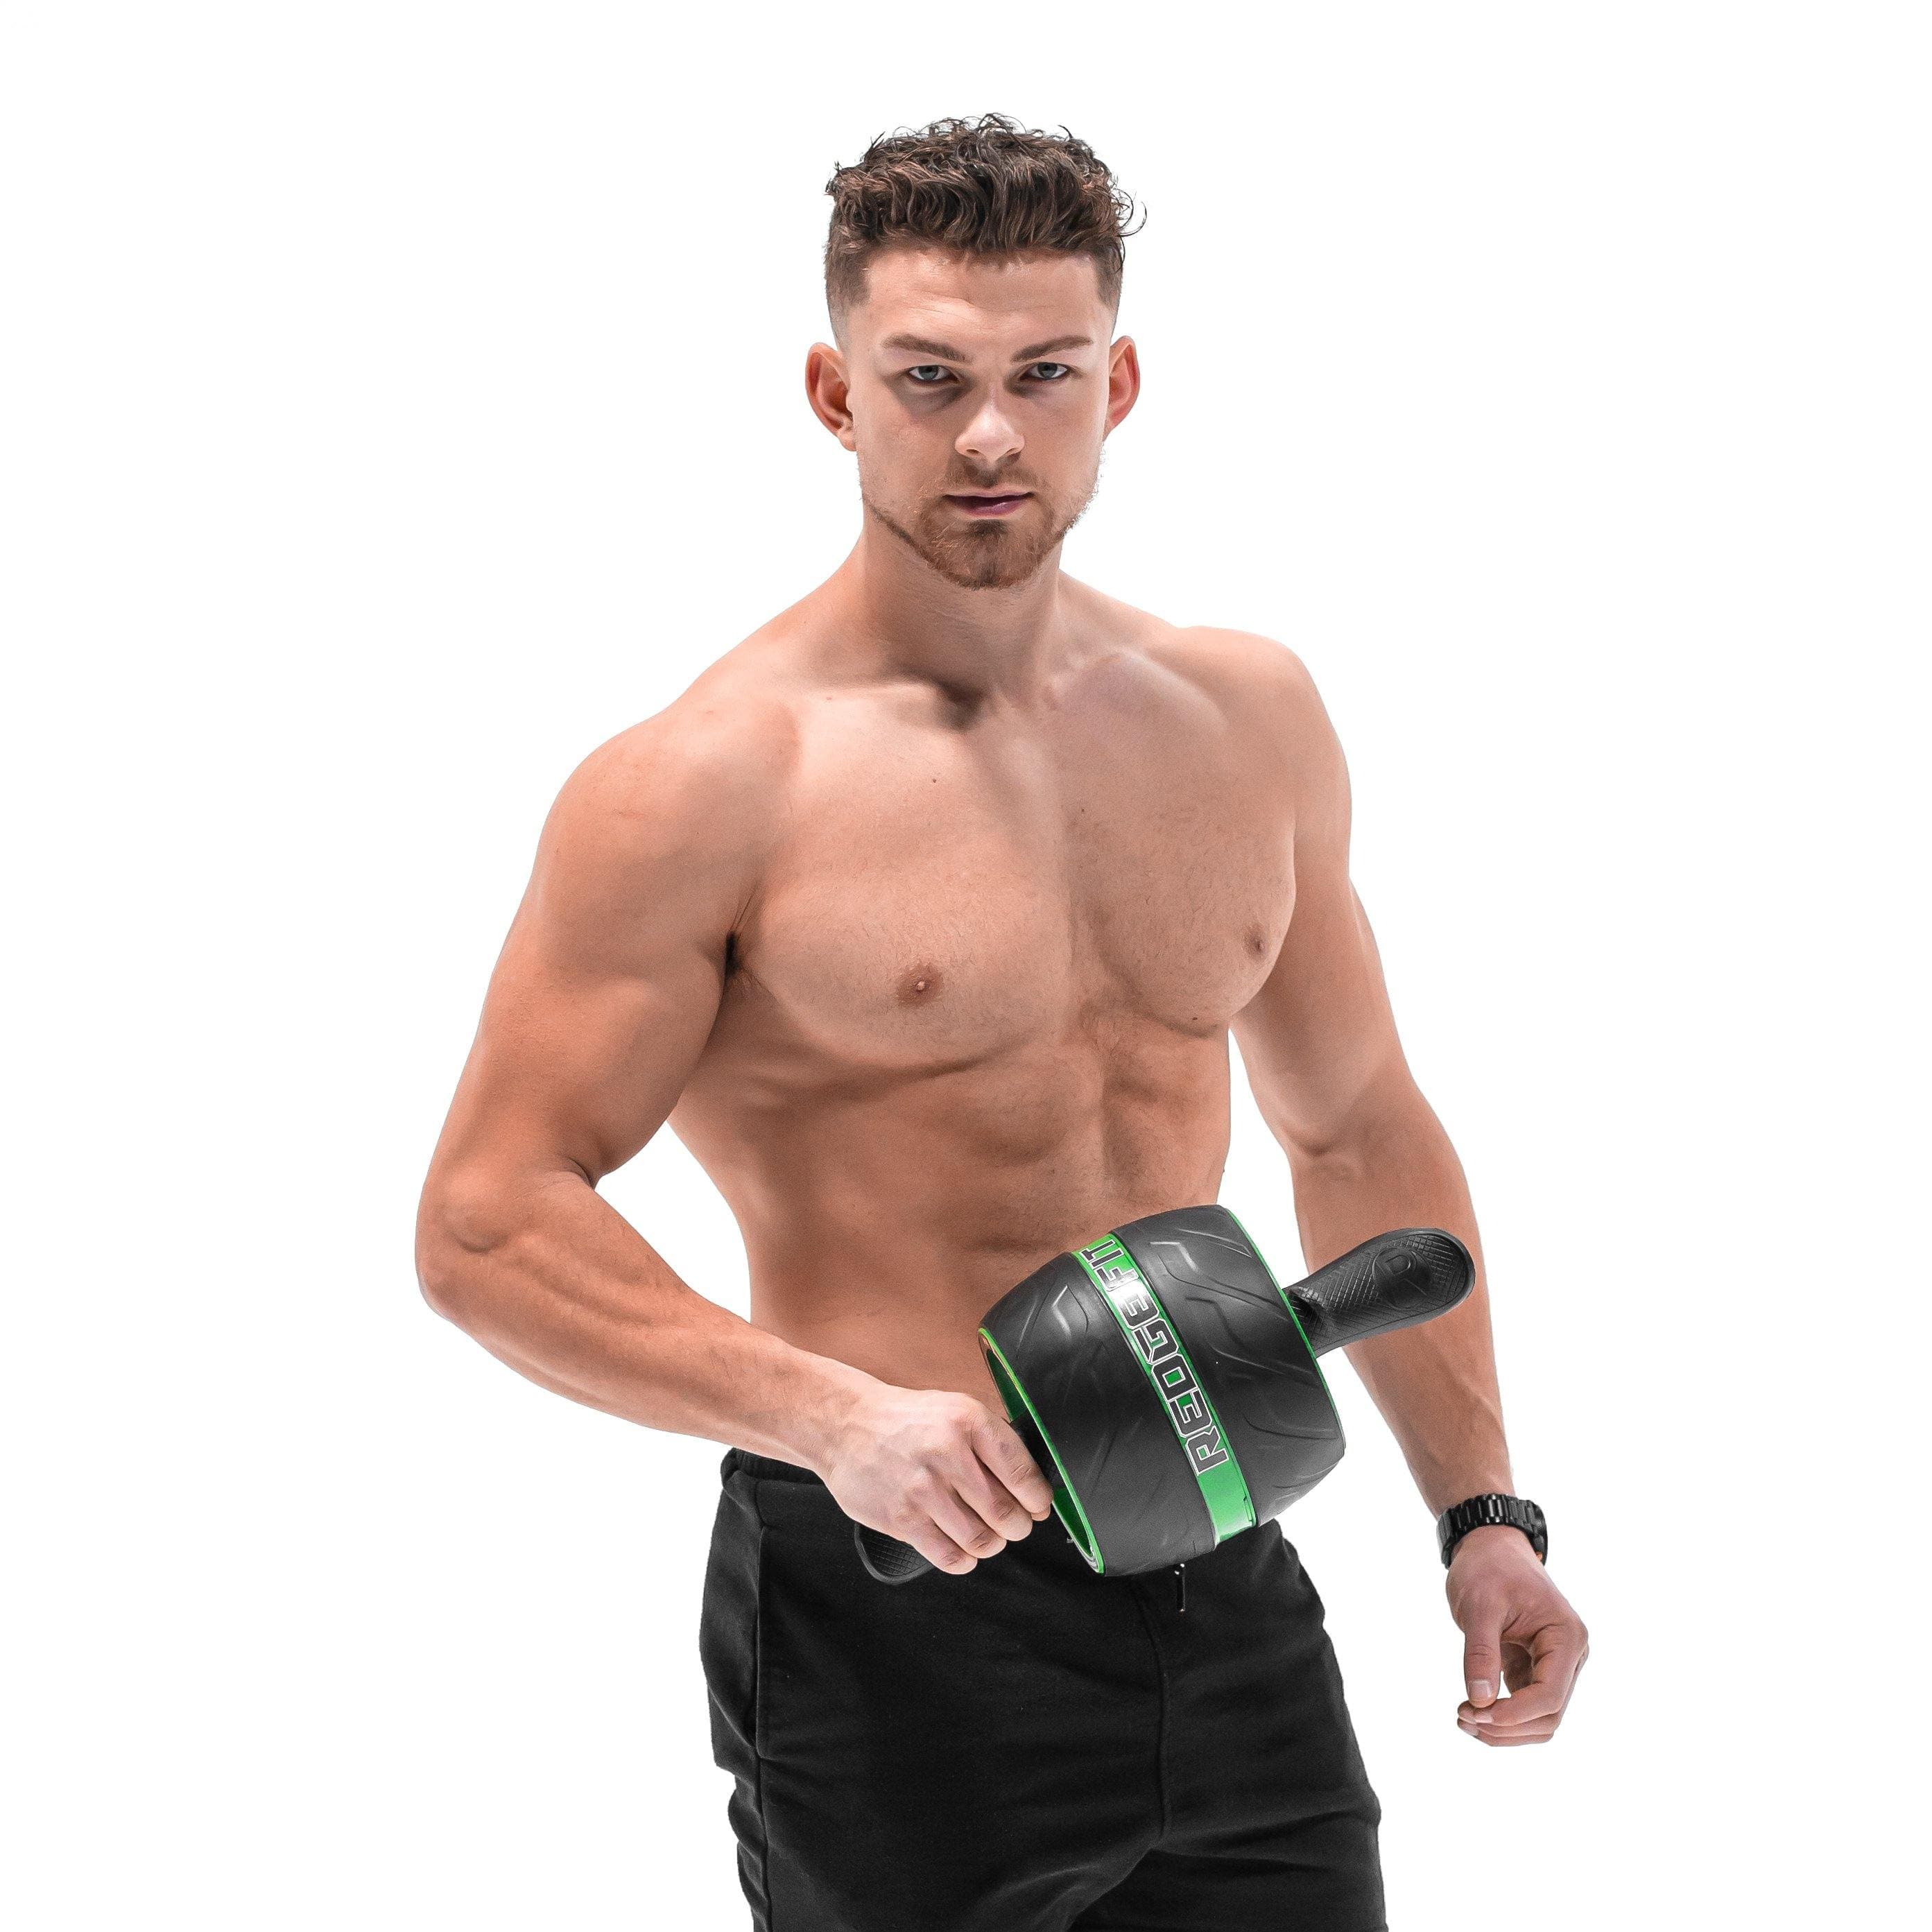  Man modeling the Redge Fit Rebound AB Roller Available at https://www.getredge.com/products/redge-fit-rebound-ab-roller